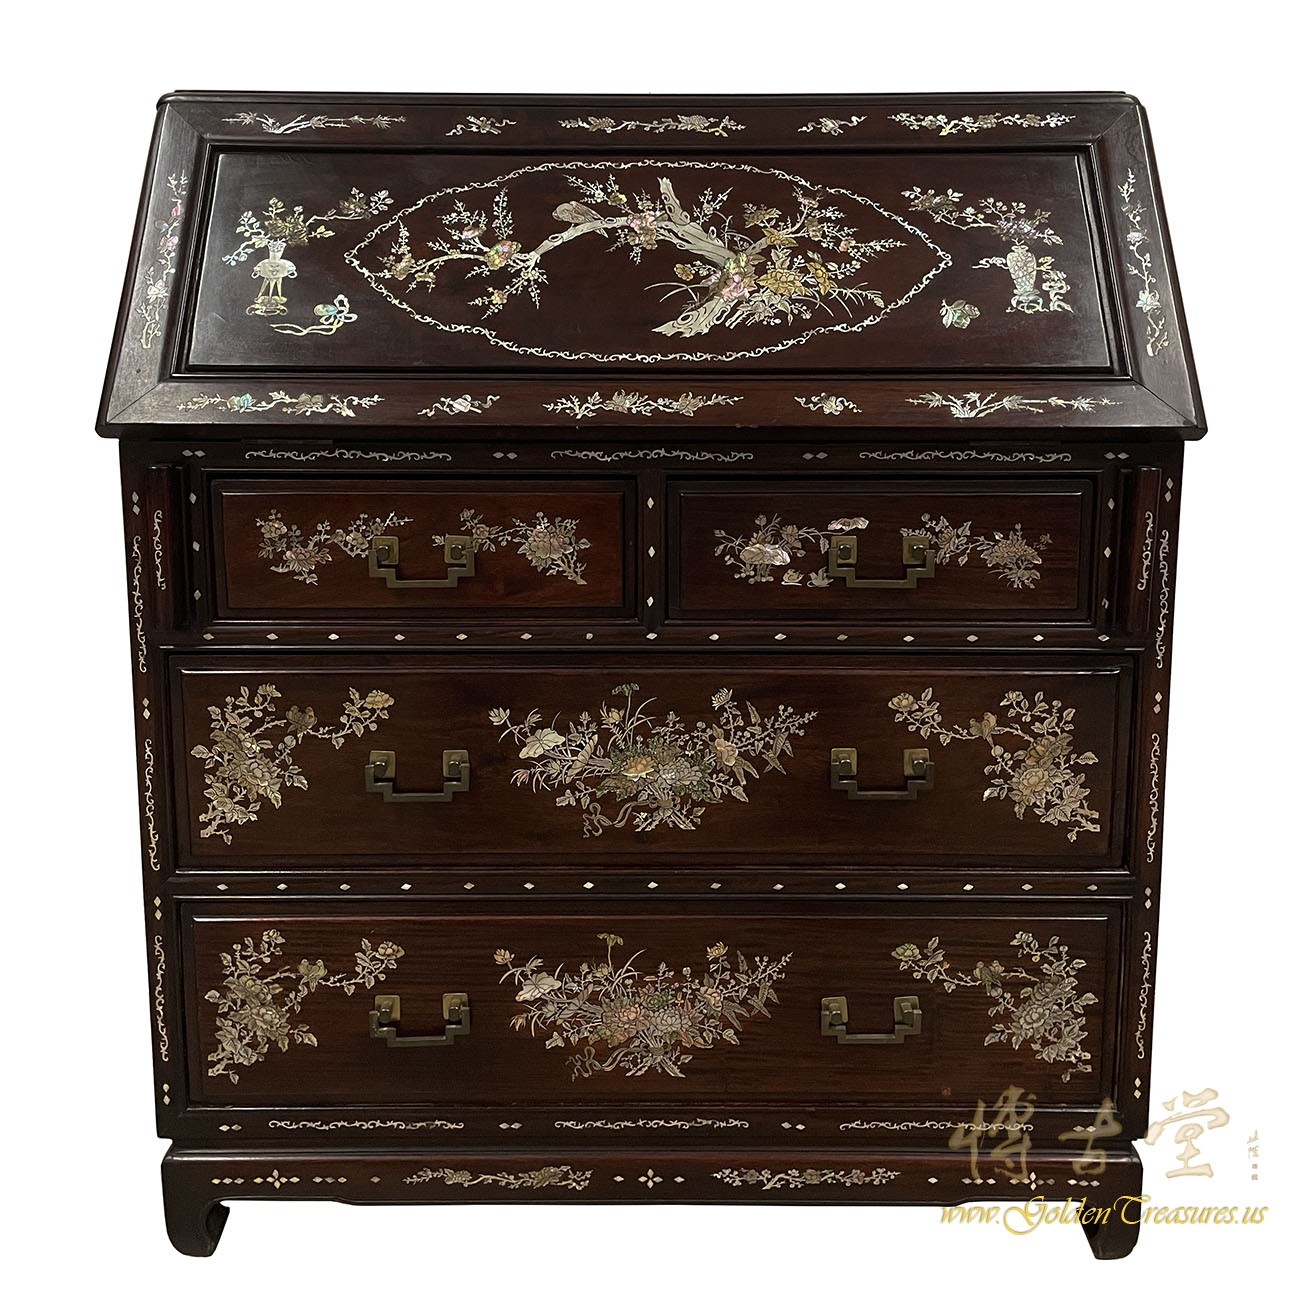 Antique Chinese Rosewood Secretary/Writing Desk with Mother of Pearl inlay